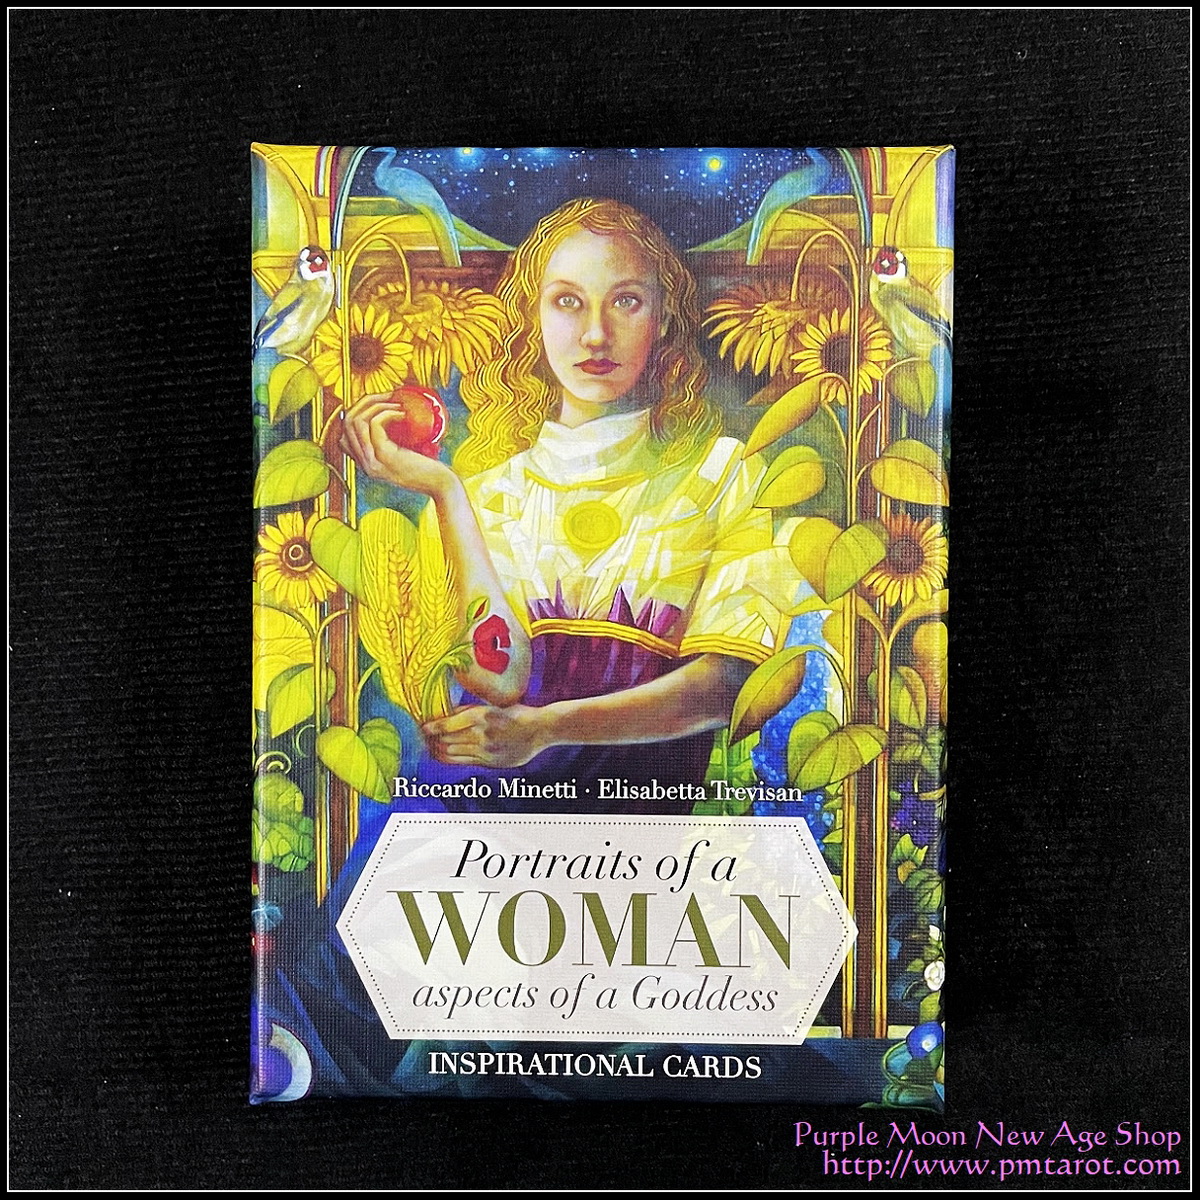 Portraits of a Woman, Aspects of a Goddess Inspirational Cards